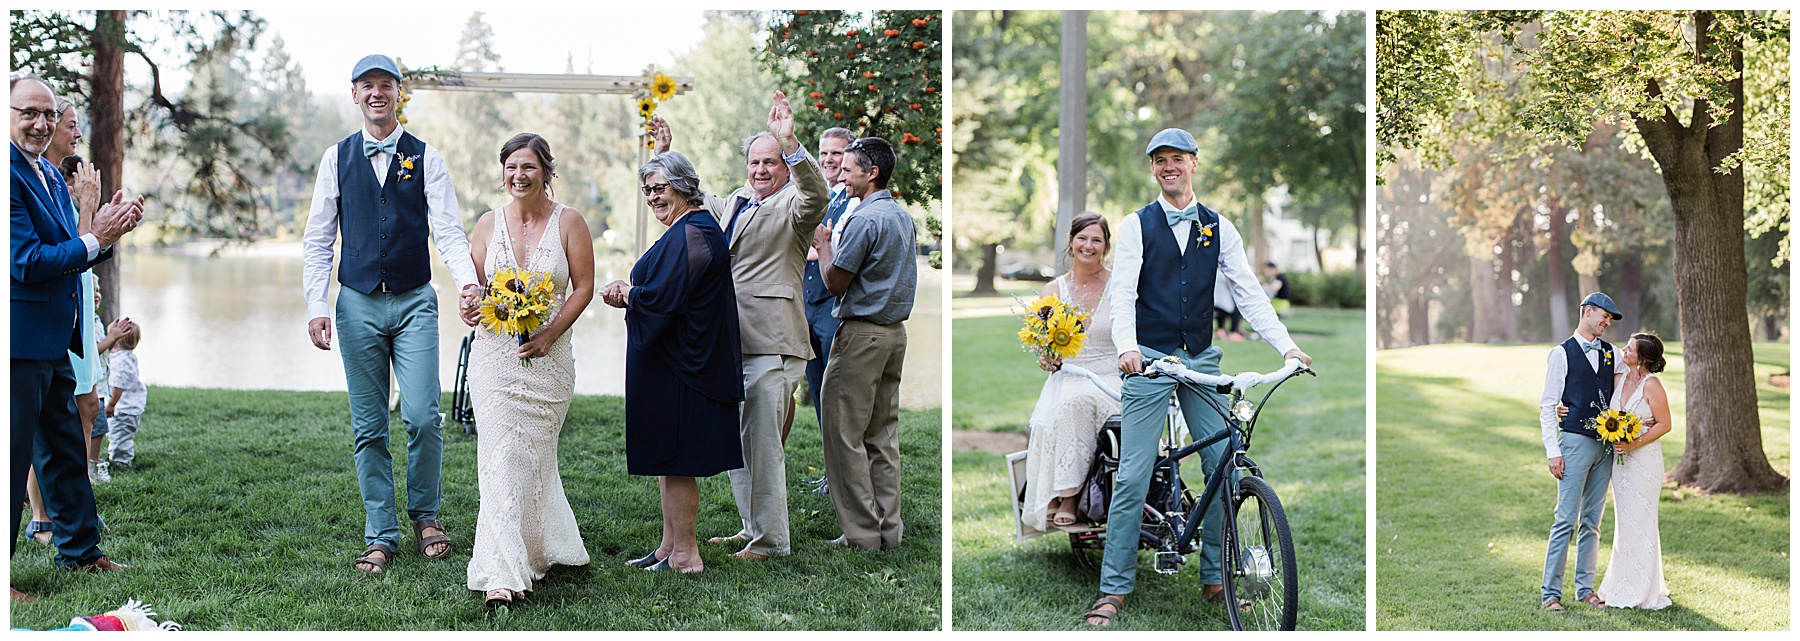 Sunny lakeside micro wedding with vintage vibes and a 1940's flat cap.